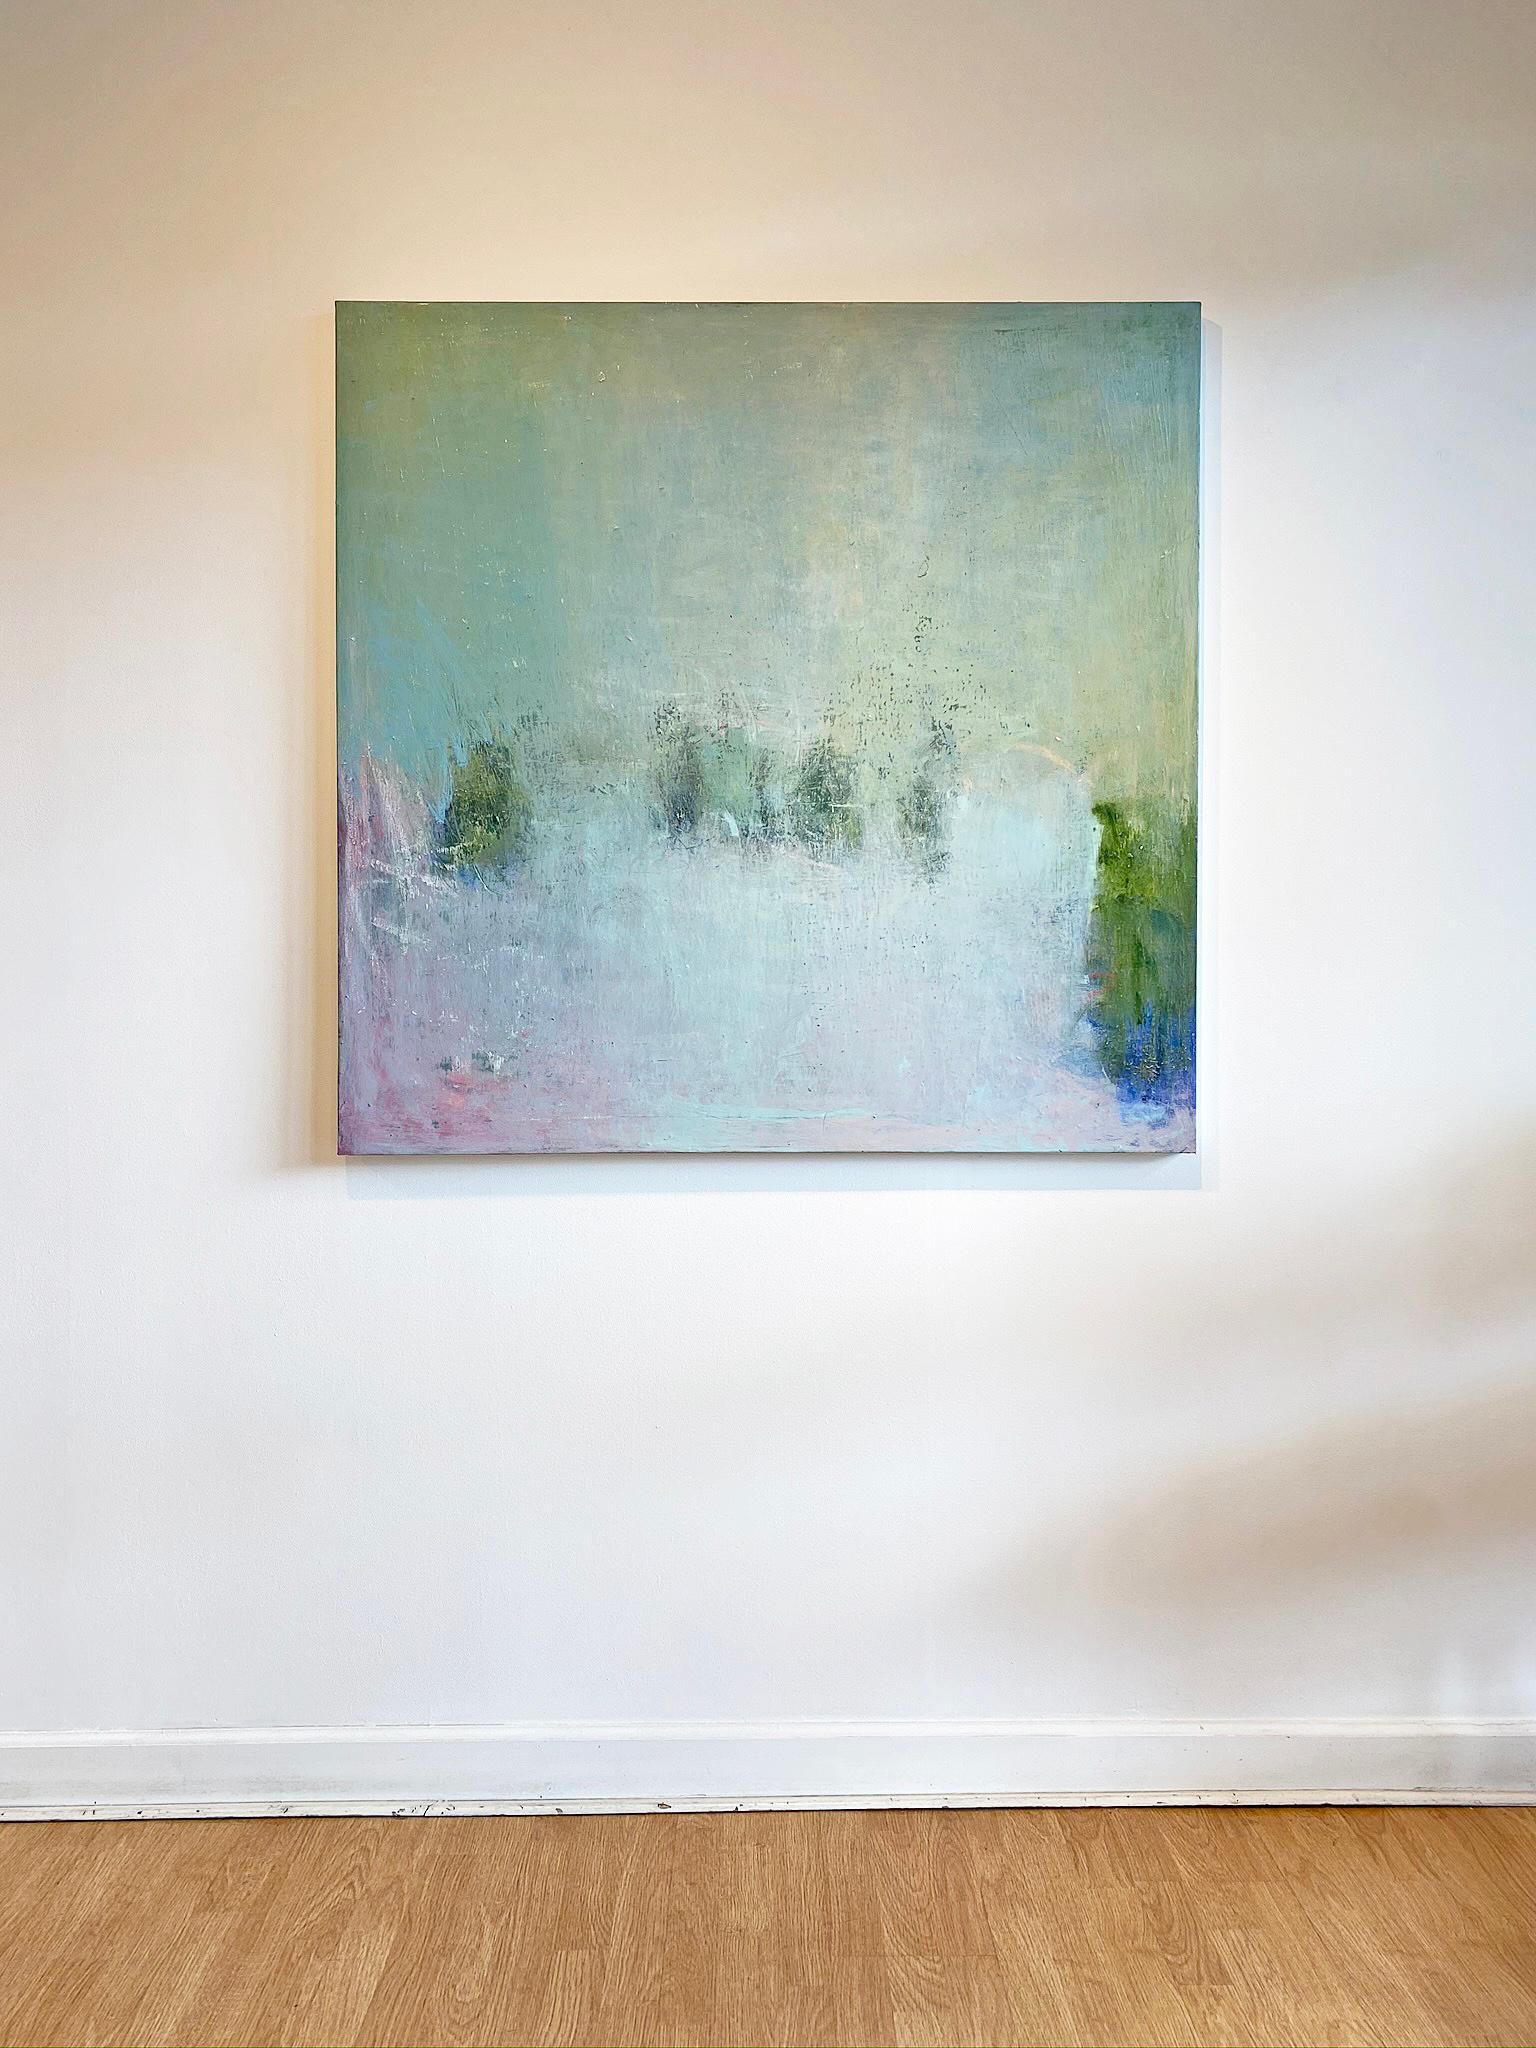 'Pink Daze' in 2019 by New York City base, French artist Sandrine Kern. Oil and cold wax on canvas, 48 x 48 in. This abstracted landscape painting features a forest scene in pastel colors of blue, pink, green, and yellow, brown, and black.

Sandrine